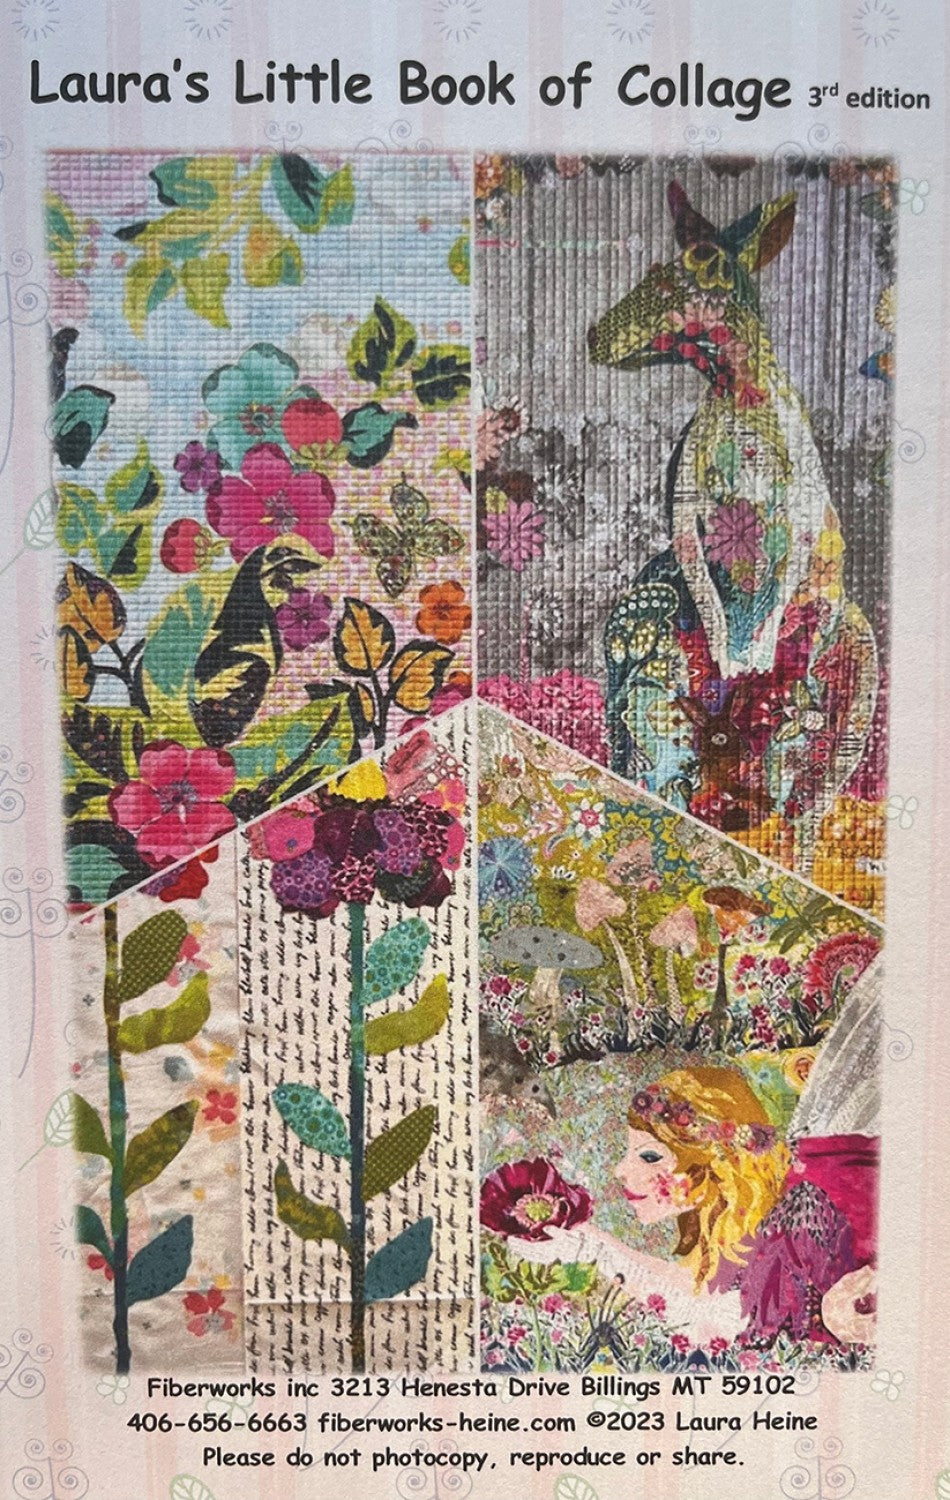 Laura's Little Book of Collage 3rd Edition by Laura Heine for Fiberworks